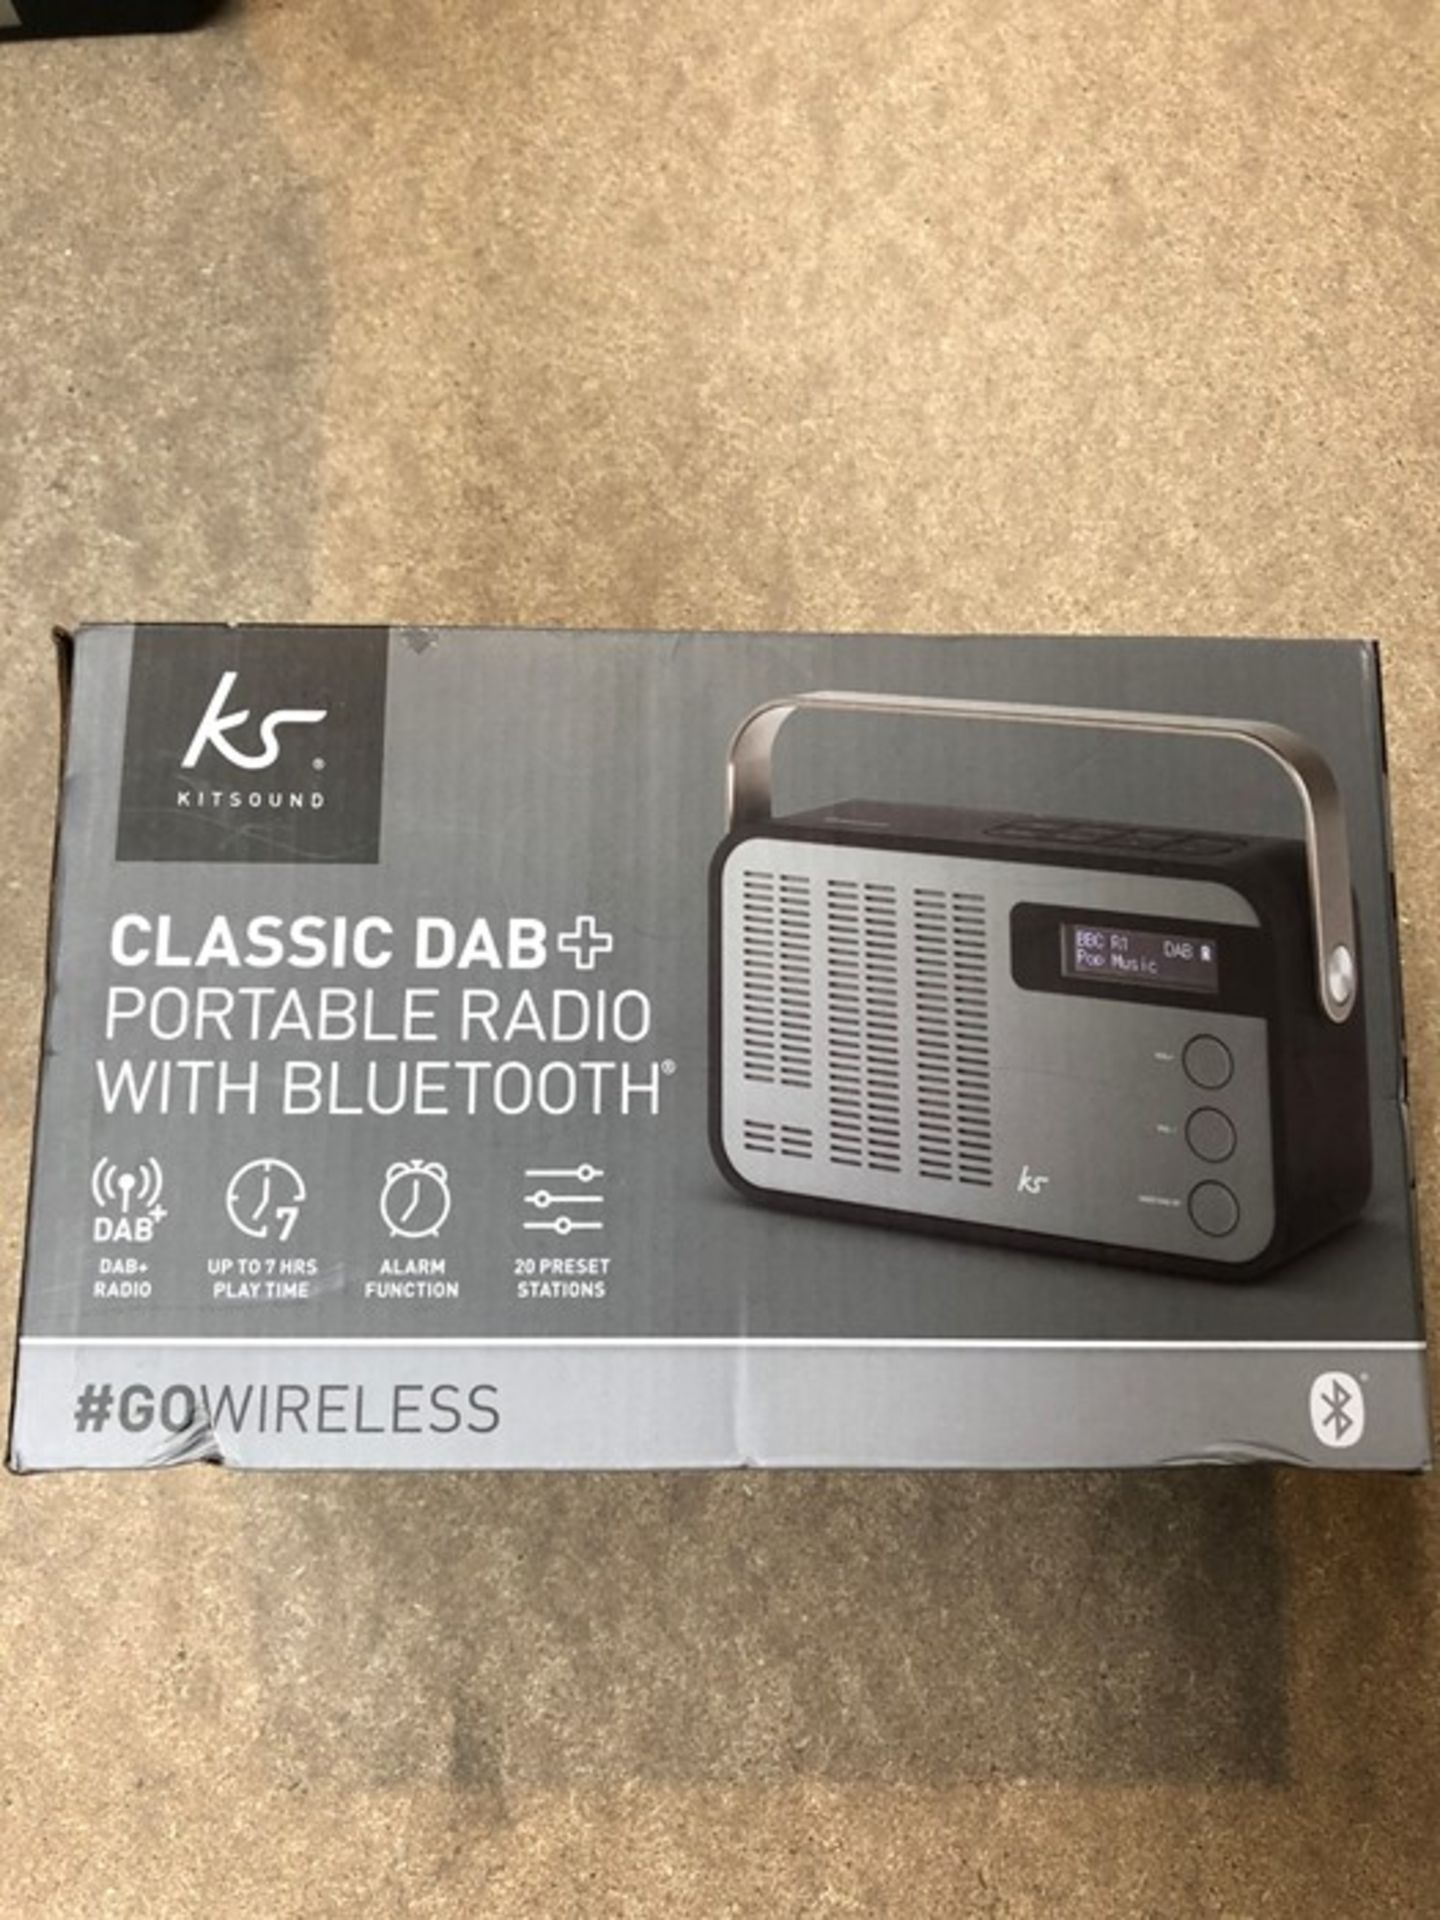 1 BOXED KITSOUND CLASSIC DAB + PORTABLE RADIO WITH BLUETOOTH IN GREY / RRP £40.00 - BL -3656 (